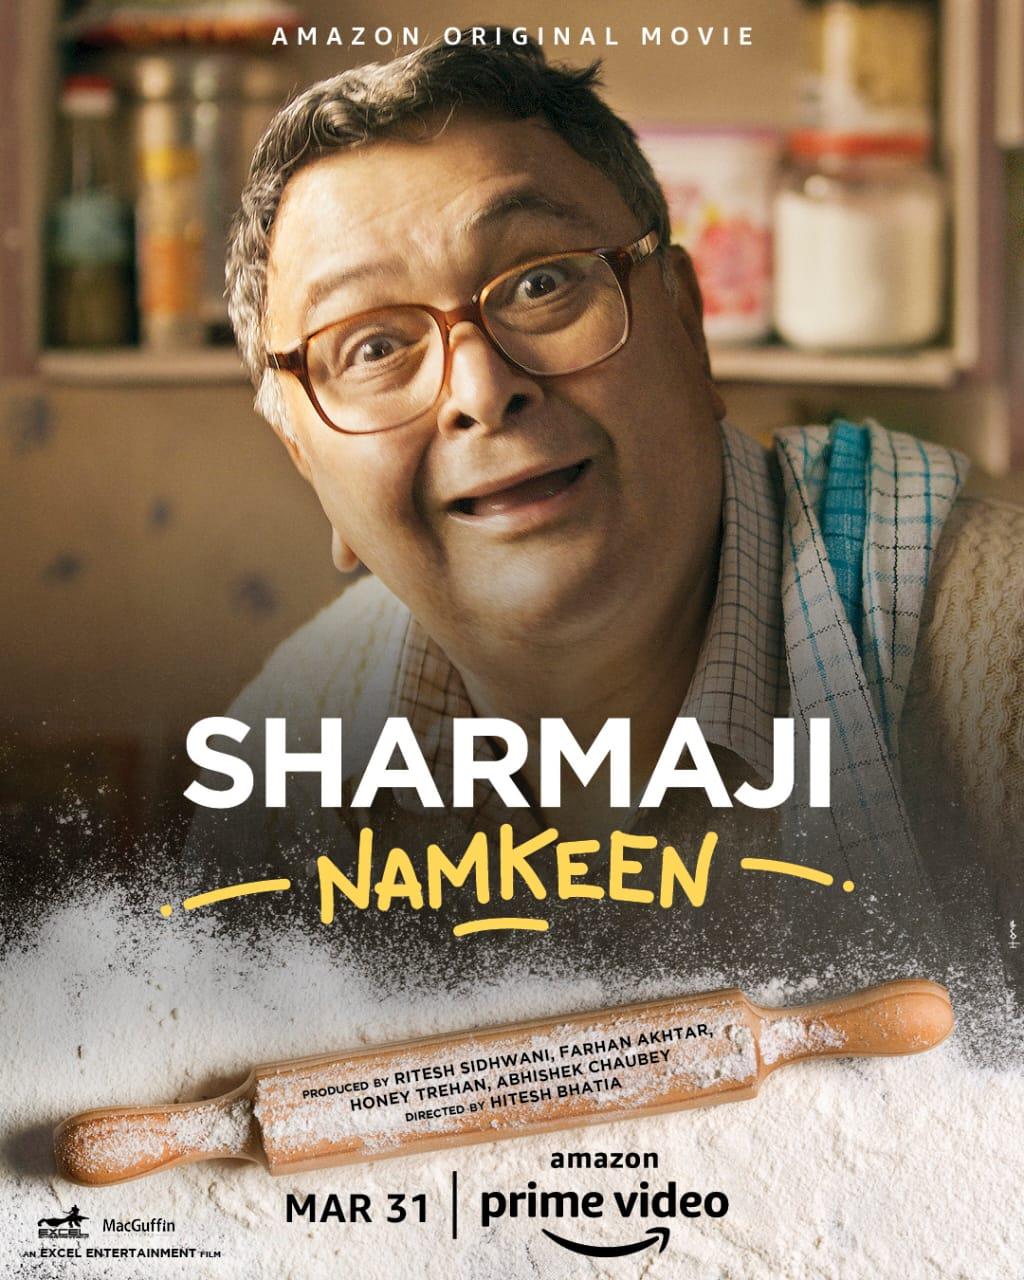 Rishi Kapoor's last film 'Sharmaji Namkeen' to release on March 31, Paresh Rawal completes remaining part in same role